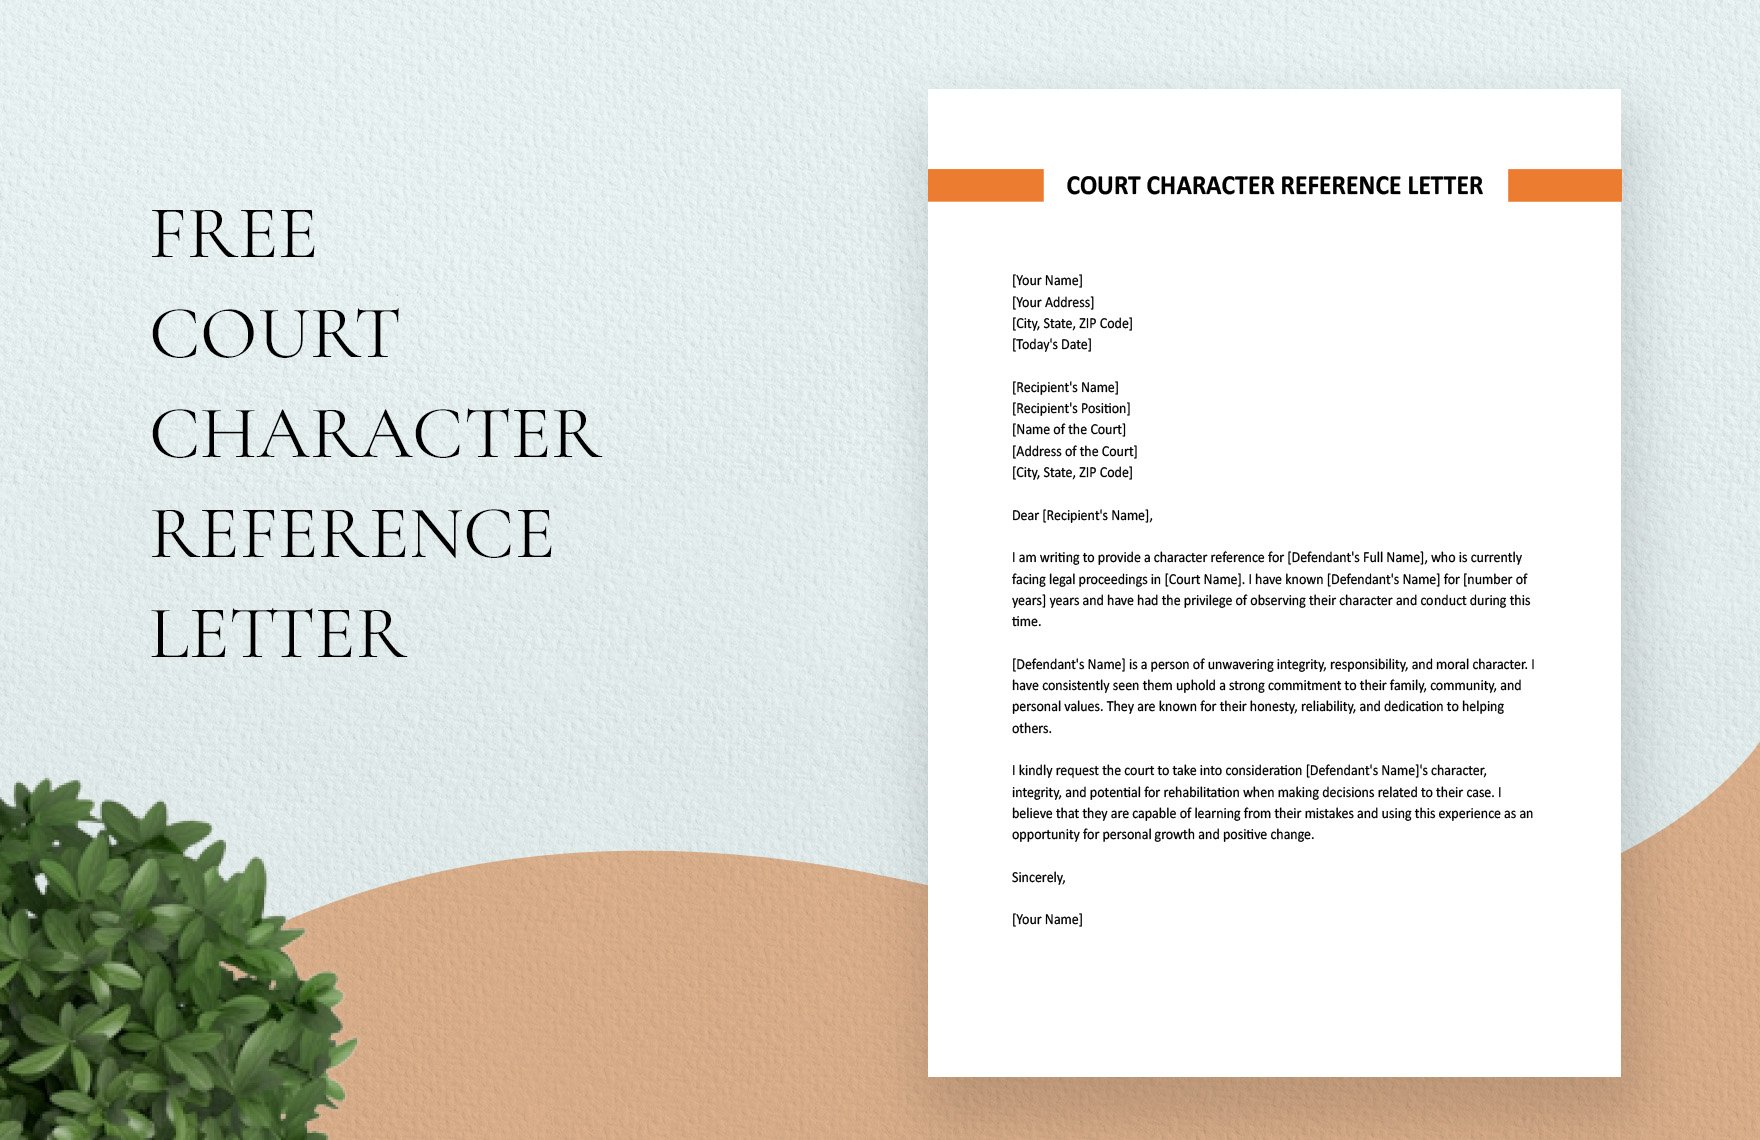 Court Character Reference Letter